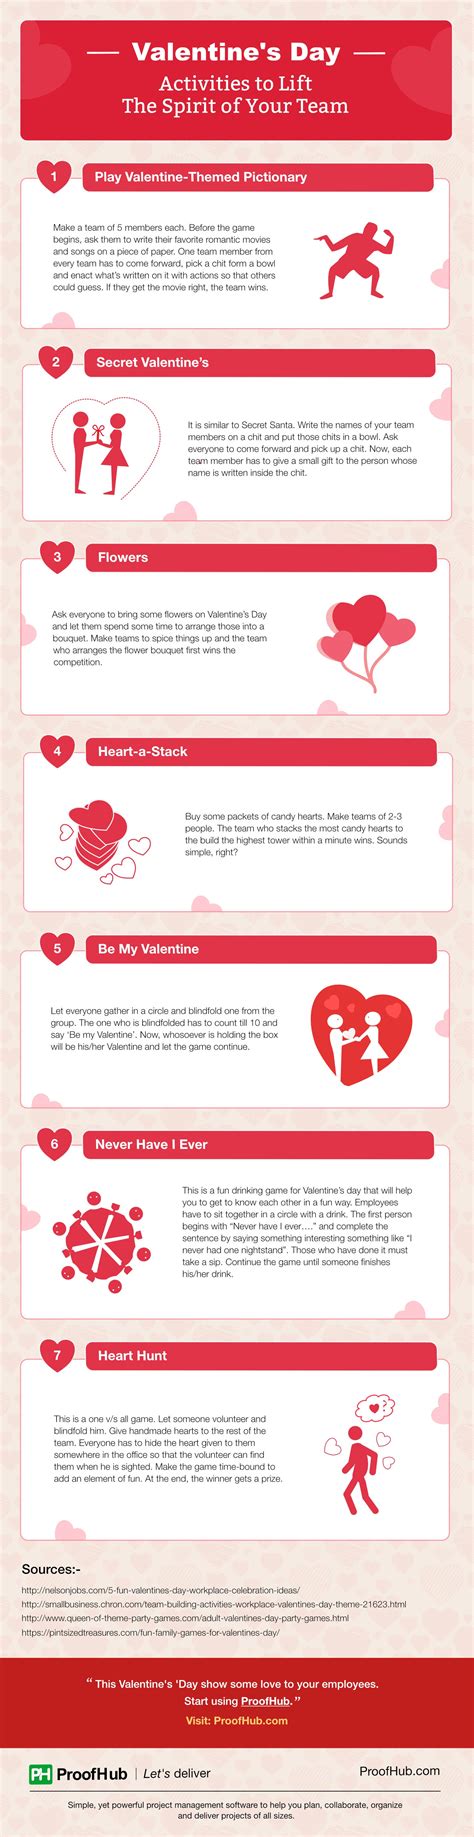 Games To Play On Valentines Day In Office Office Views